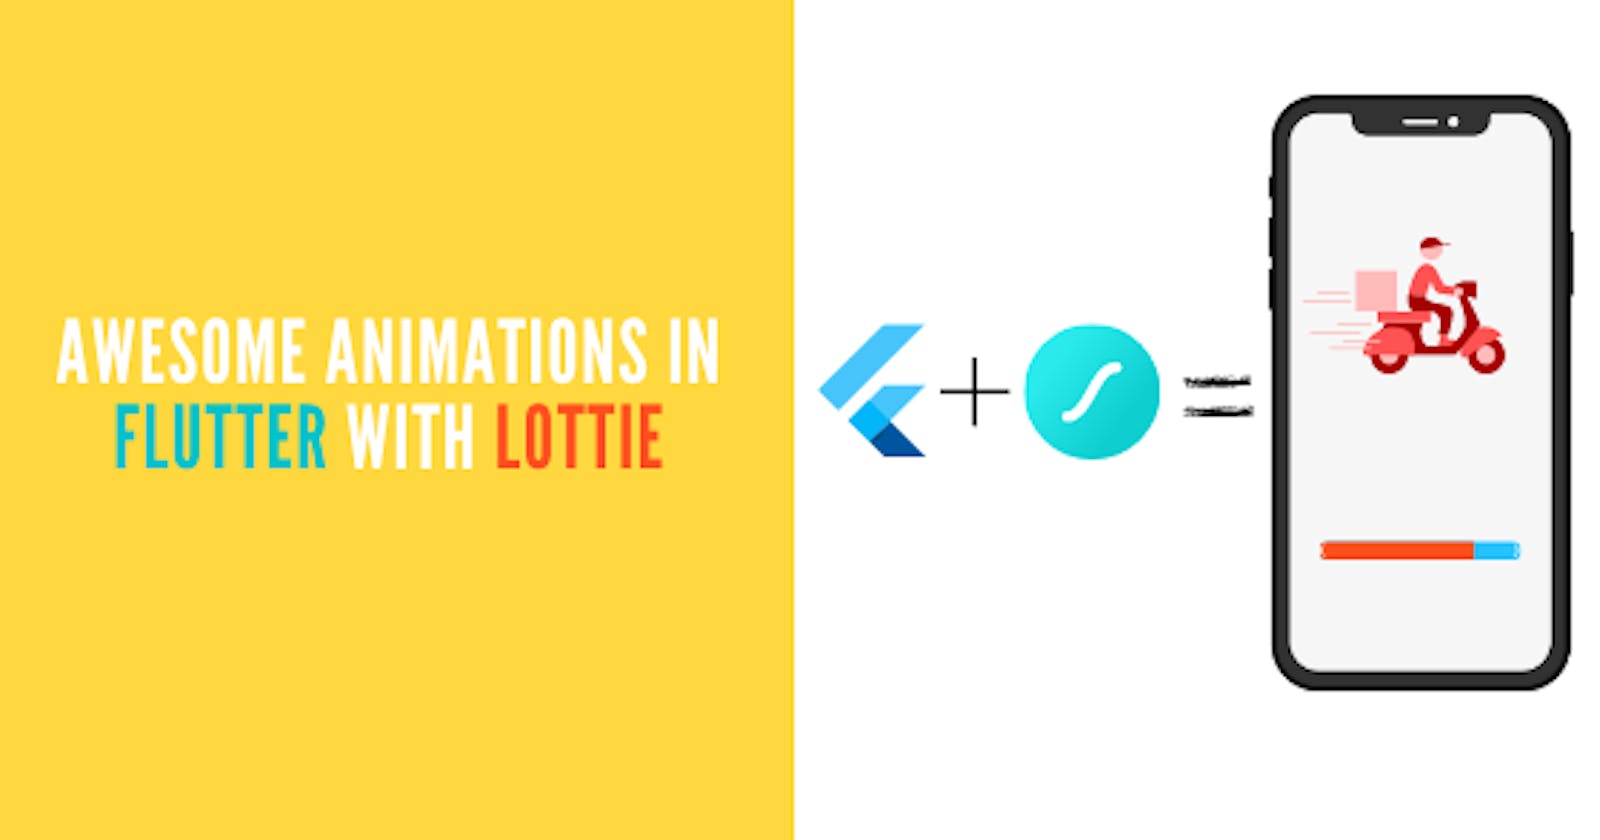 How to add beautiful animations to your app with Flutter and Lottie